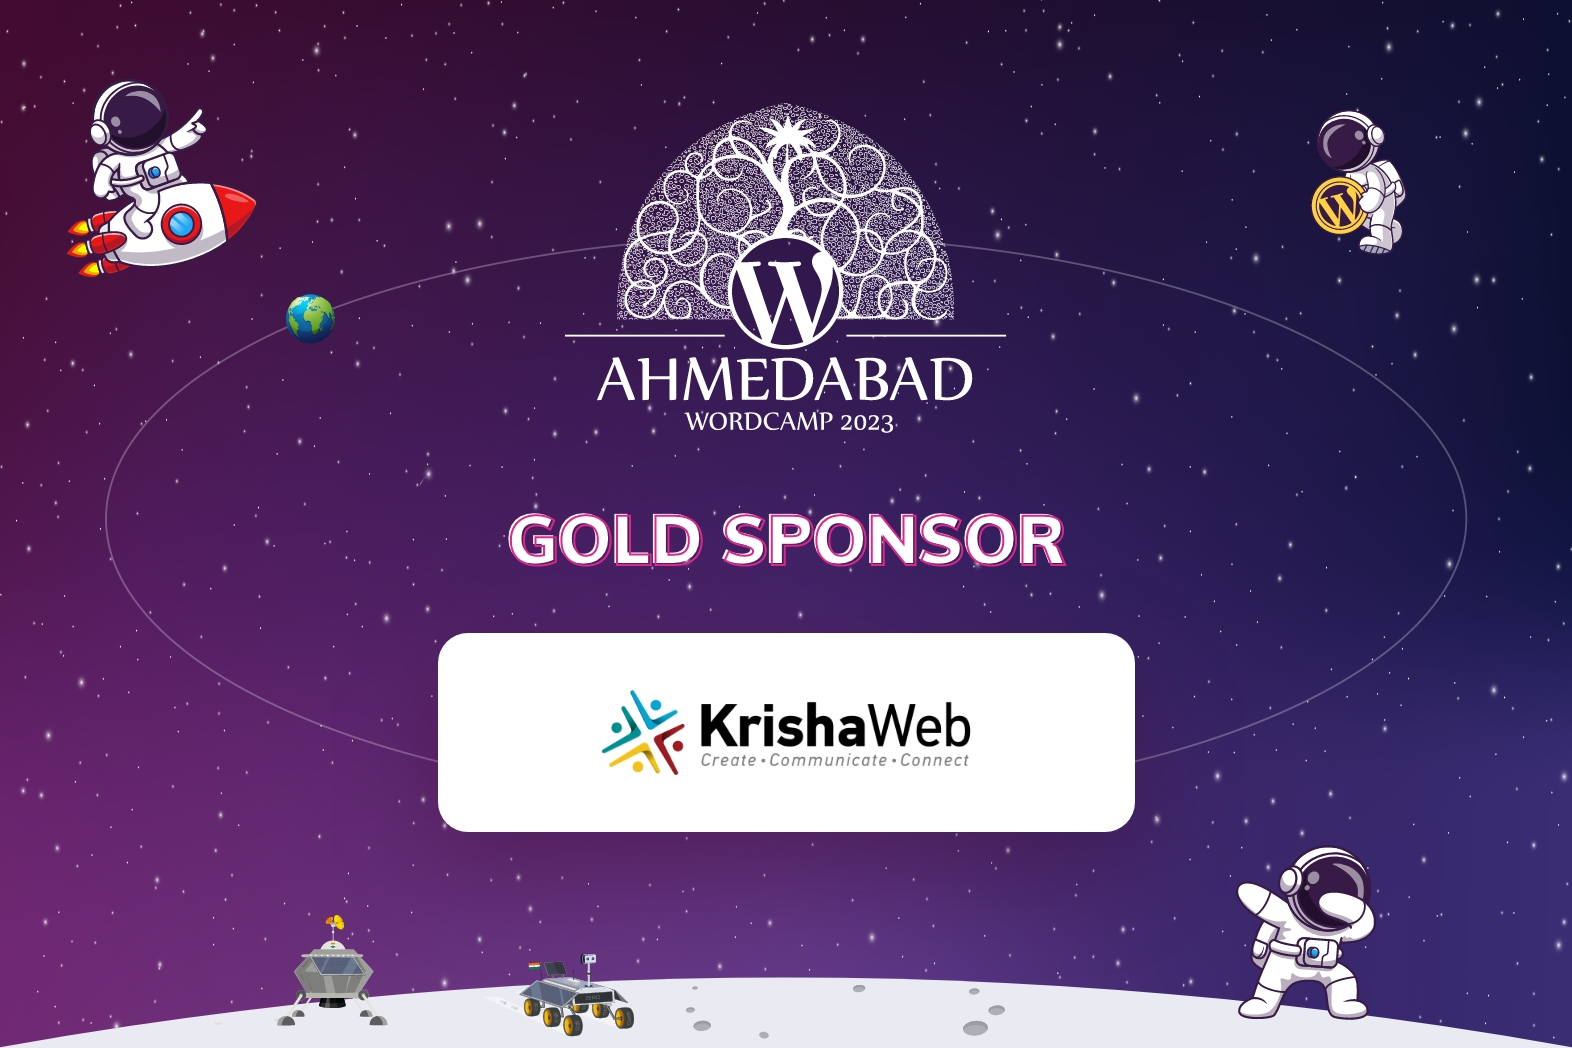 Thank You Krishaweb, for being our Gold Sponsor 